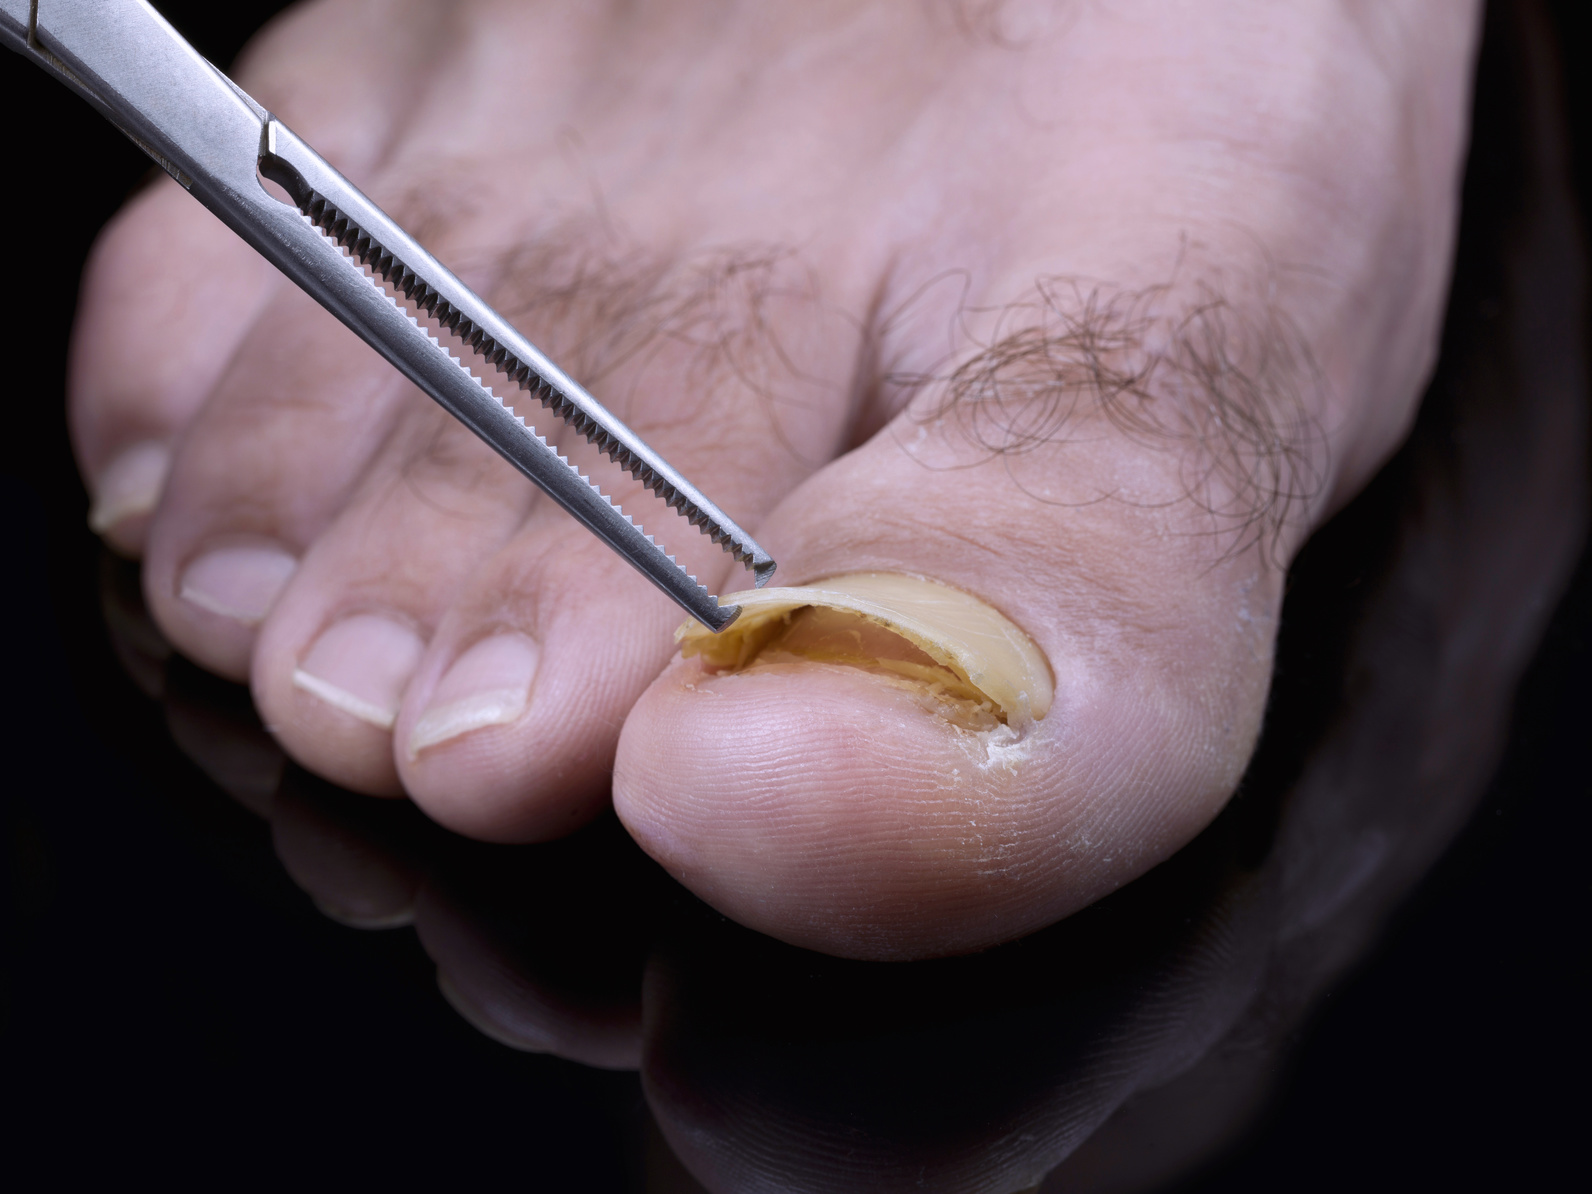 Fungal Nail Infection-5 Questions to ASK - A Step Ahead Foot and Ankle Care